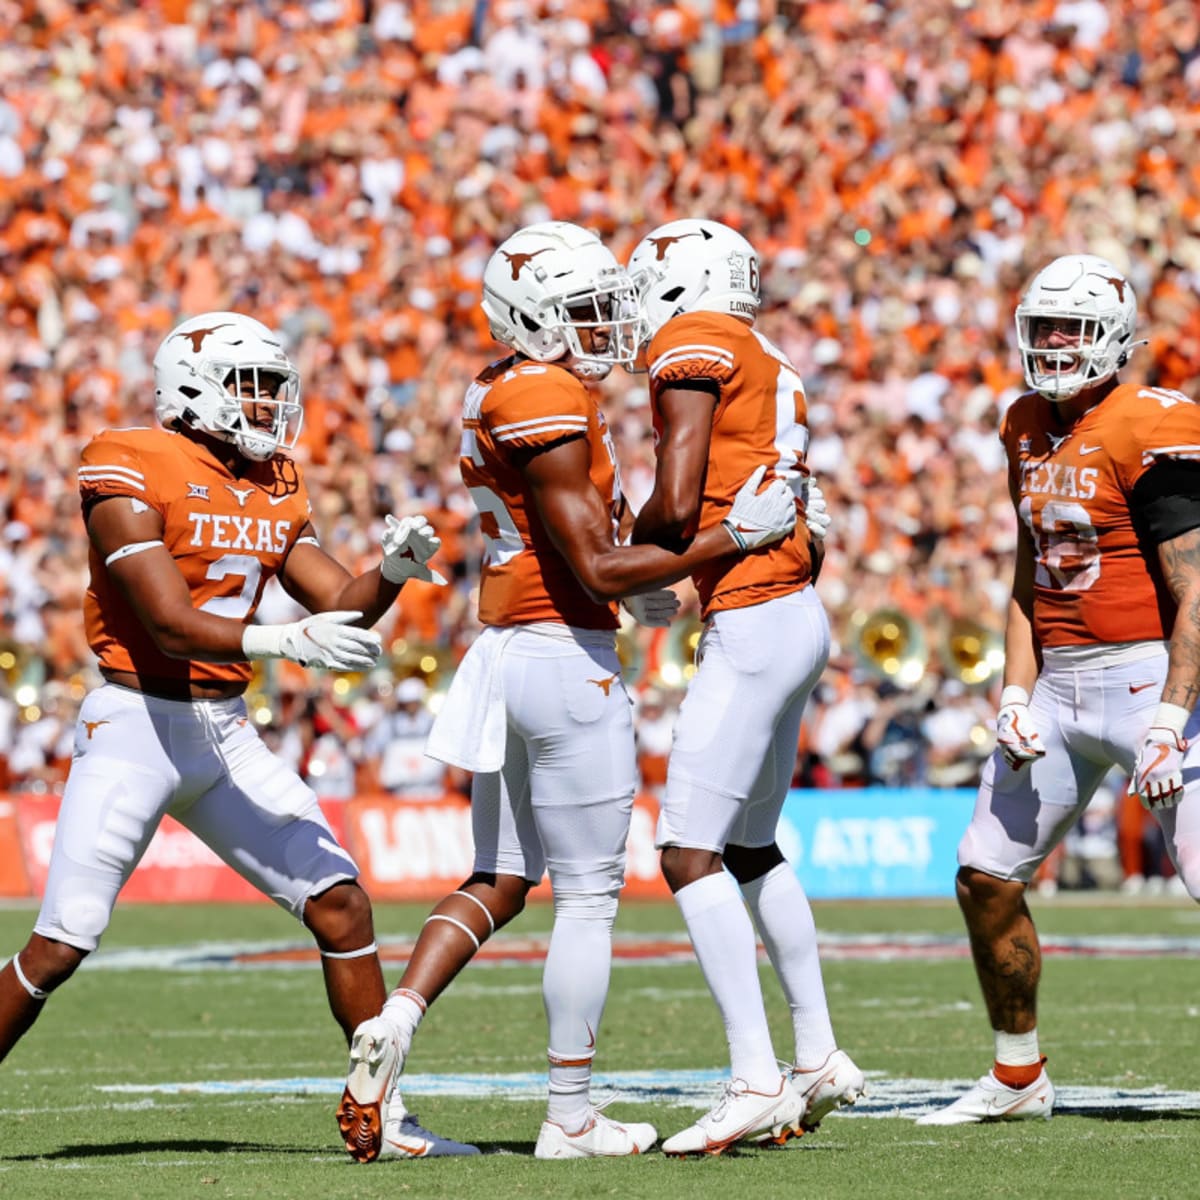 Jersey numbers revealed for Texas' 2022 newcomers